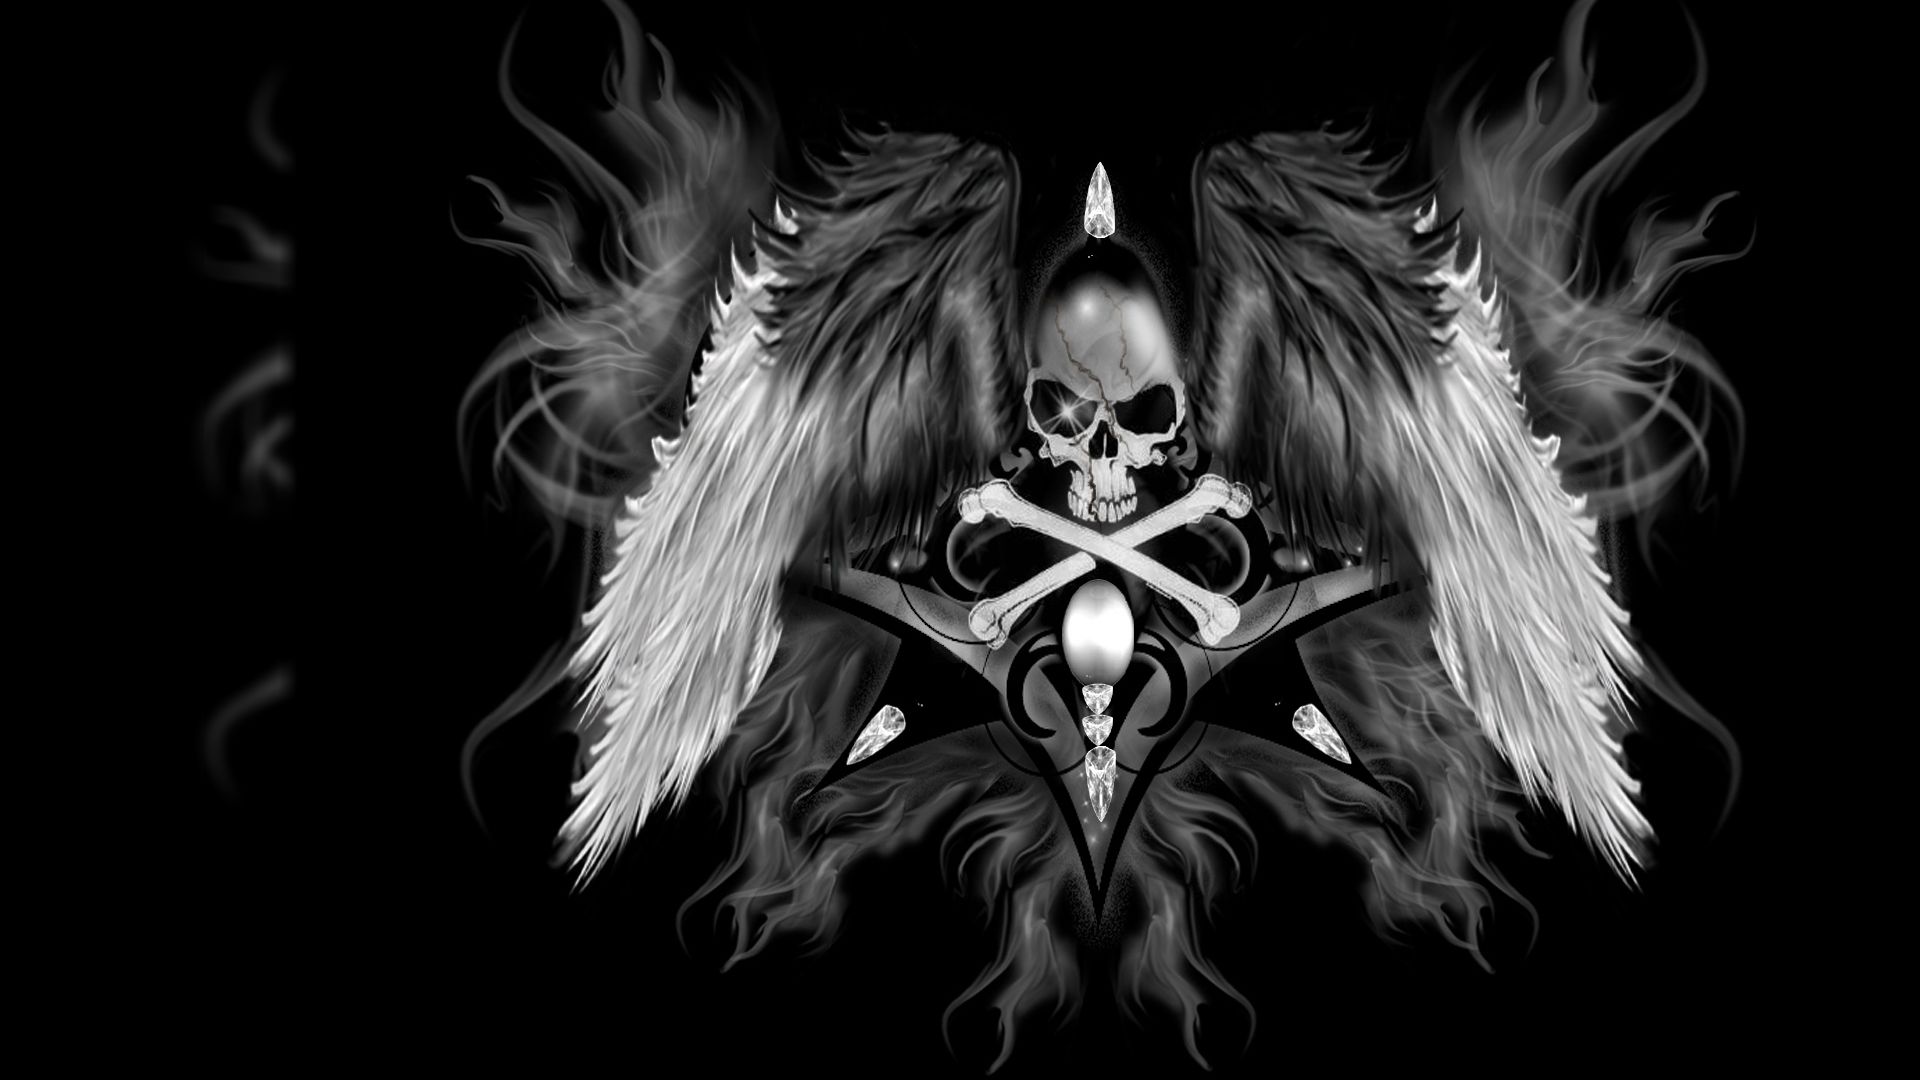 Free Skull Wallpapers Wallpapers, Backgrounds, Images, Art Photos